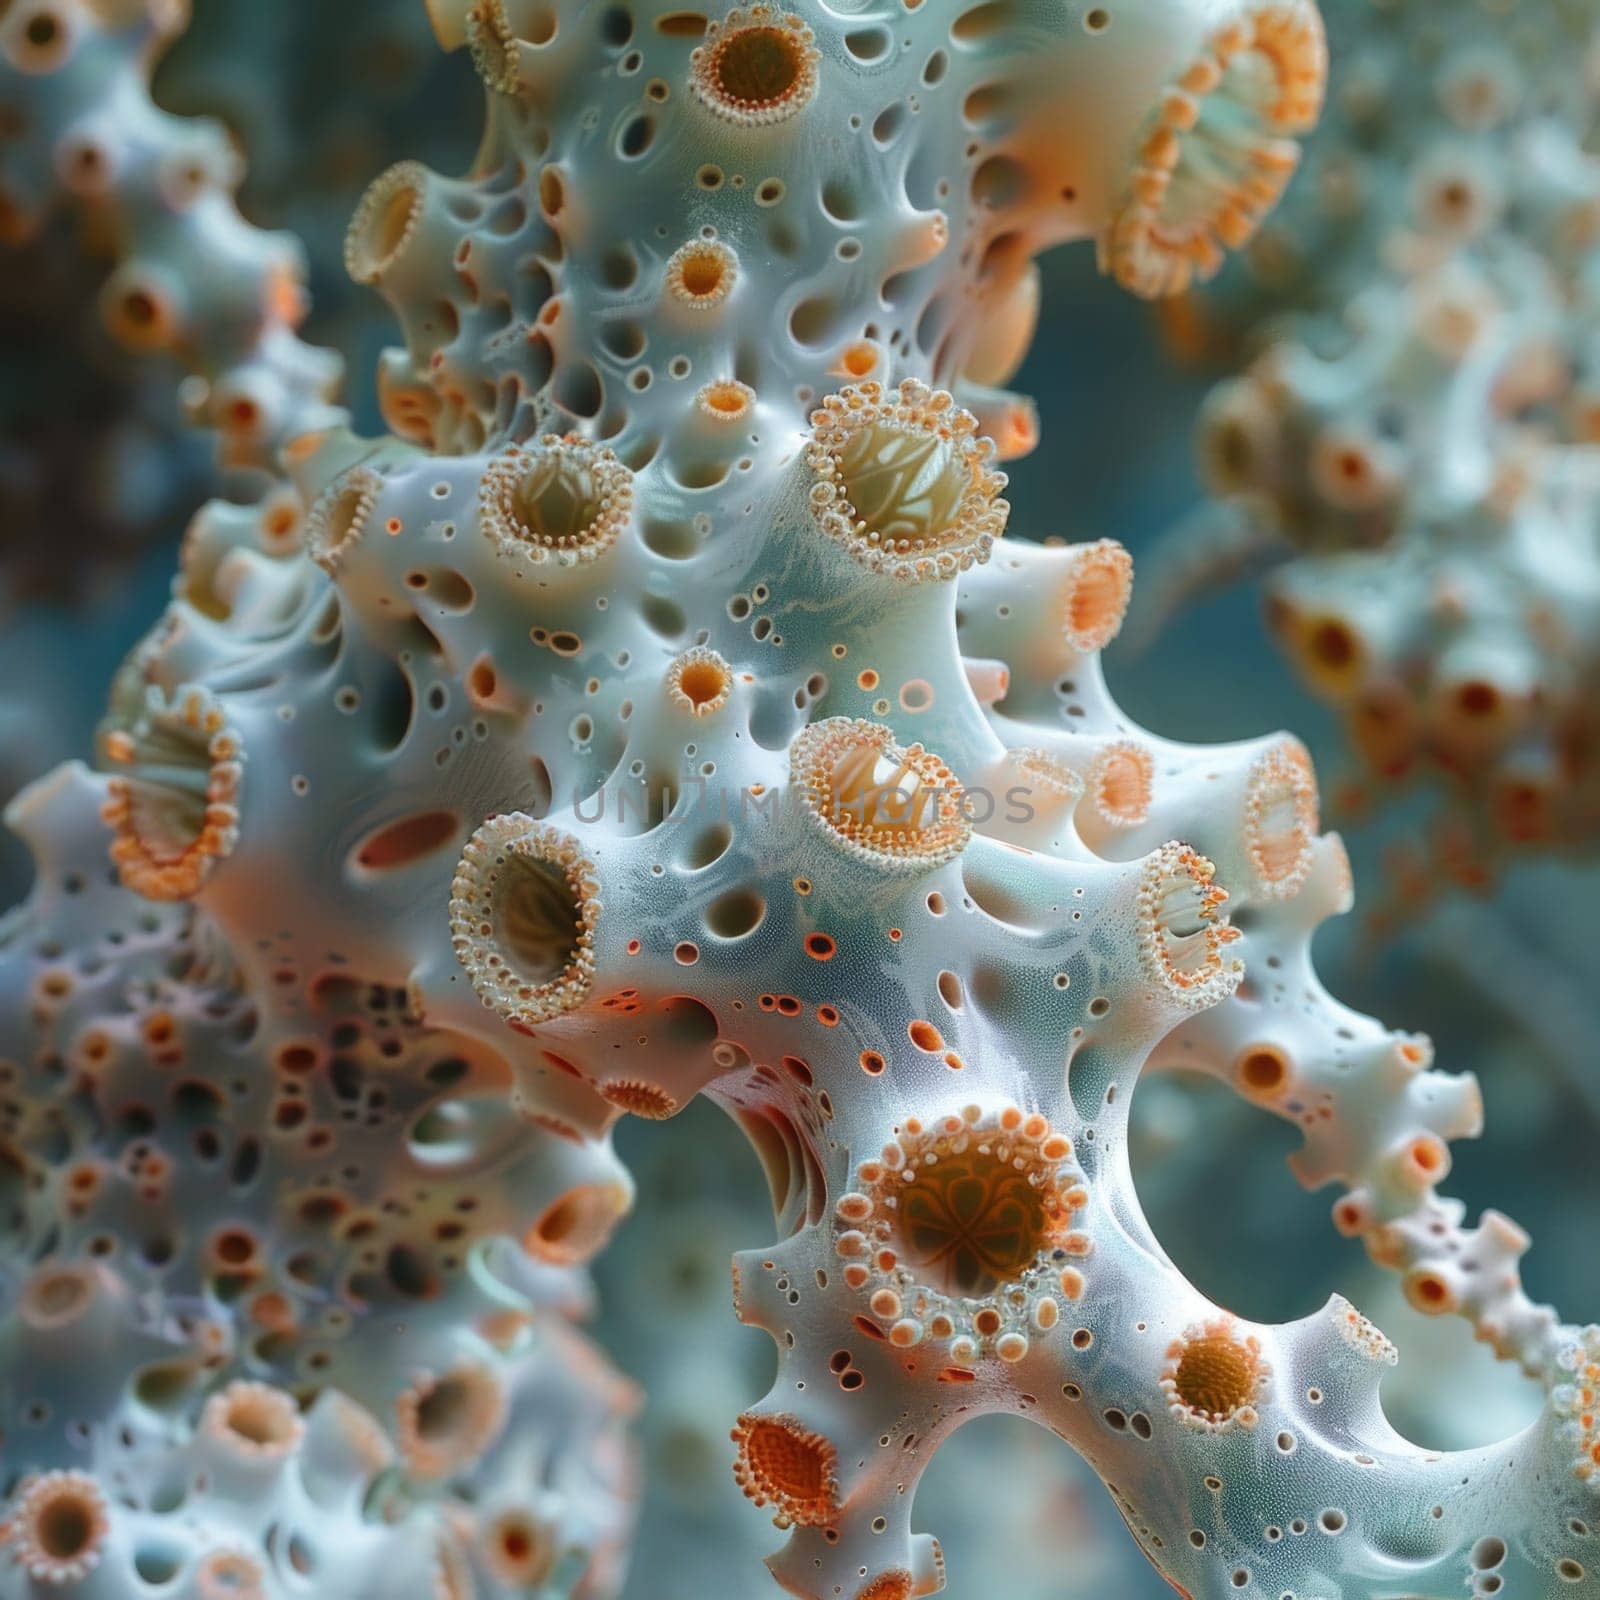 A detailed view of a sea anemone, highlighting its tentacles and body structure underwater.